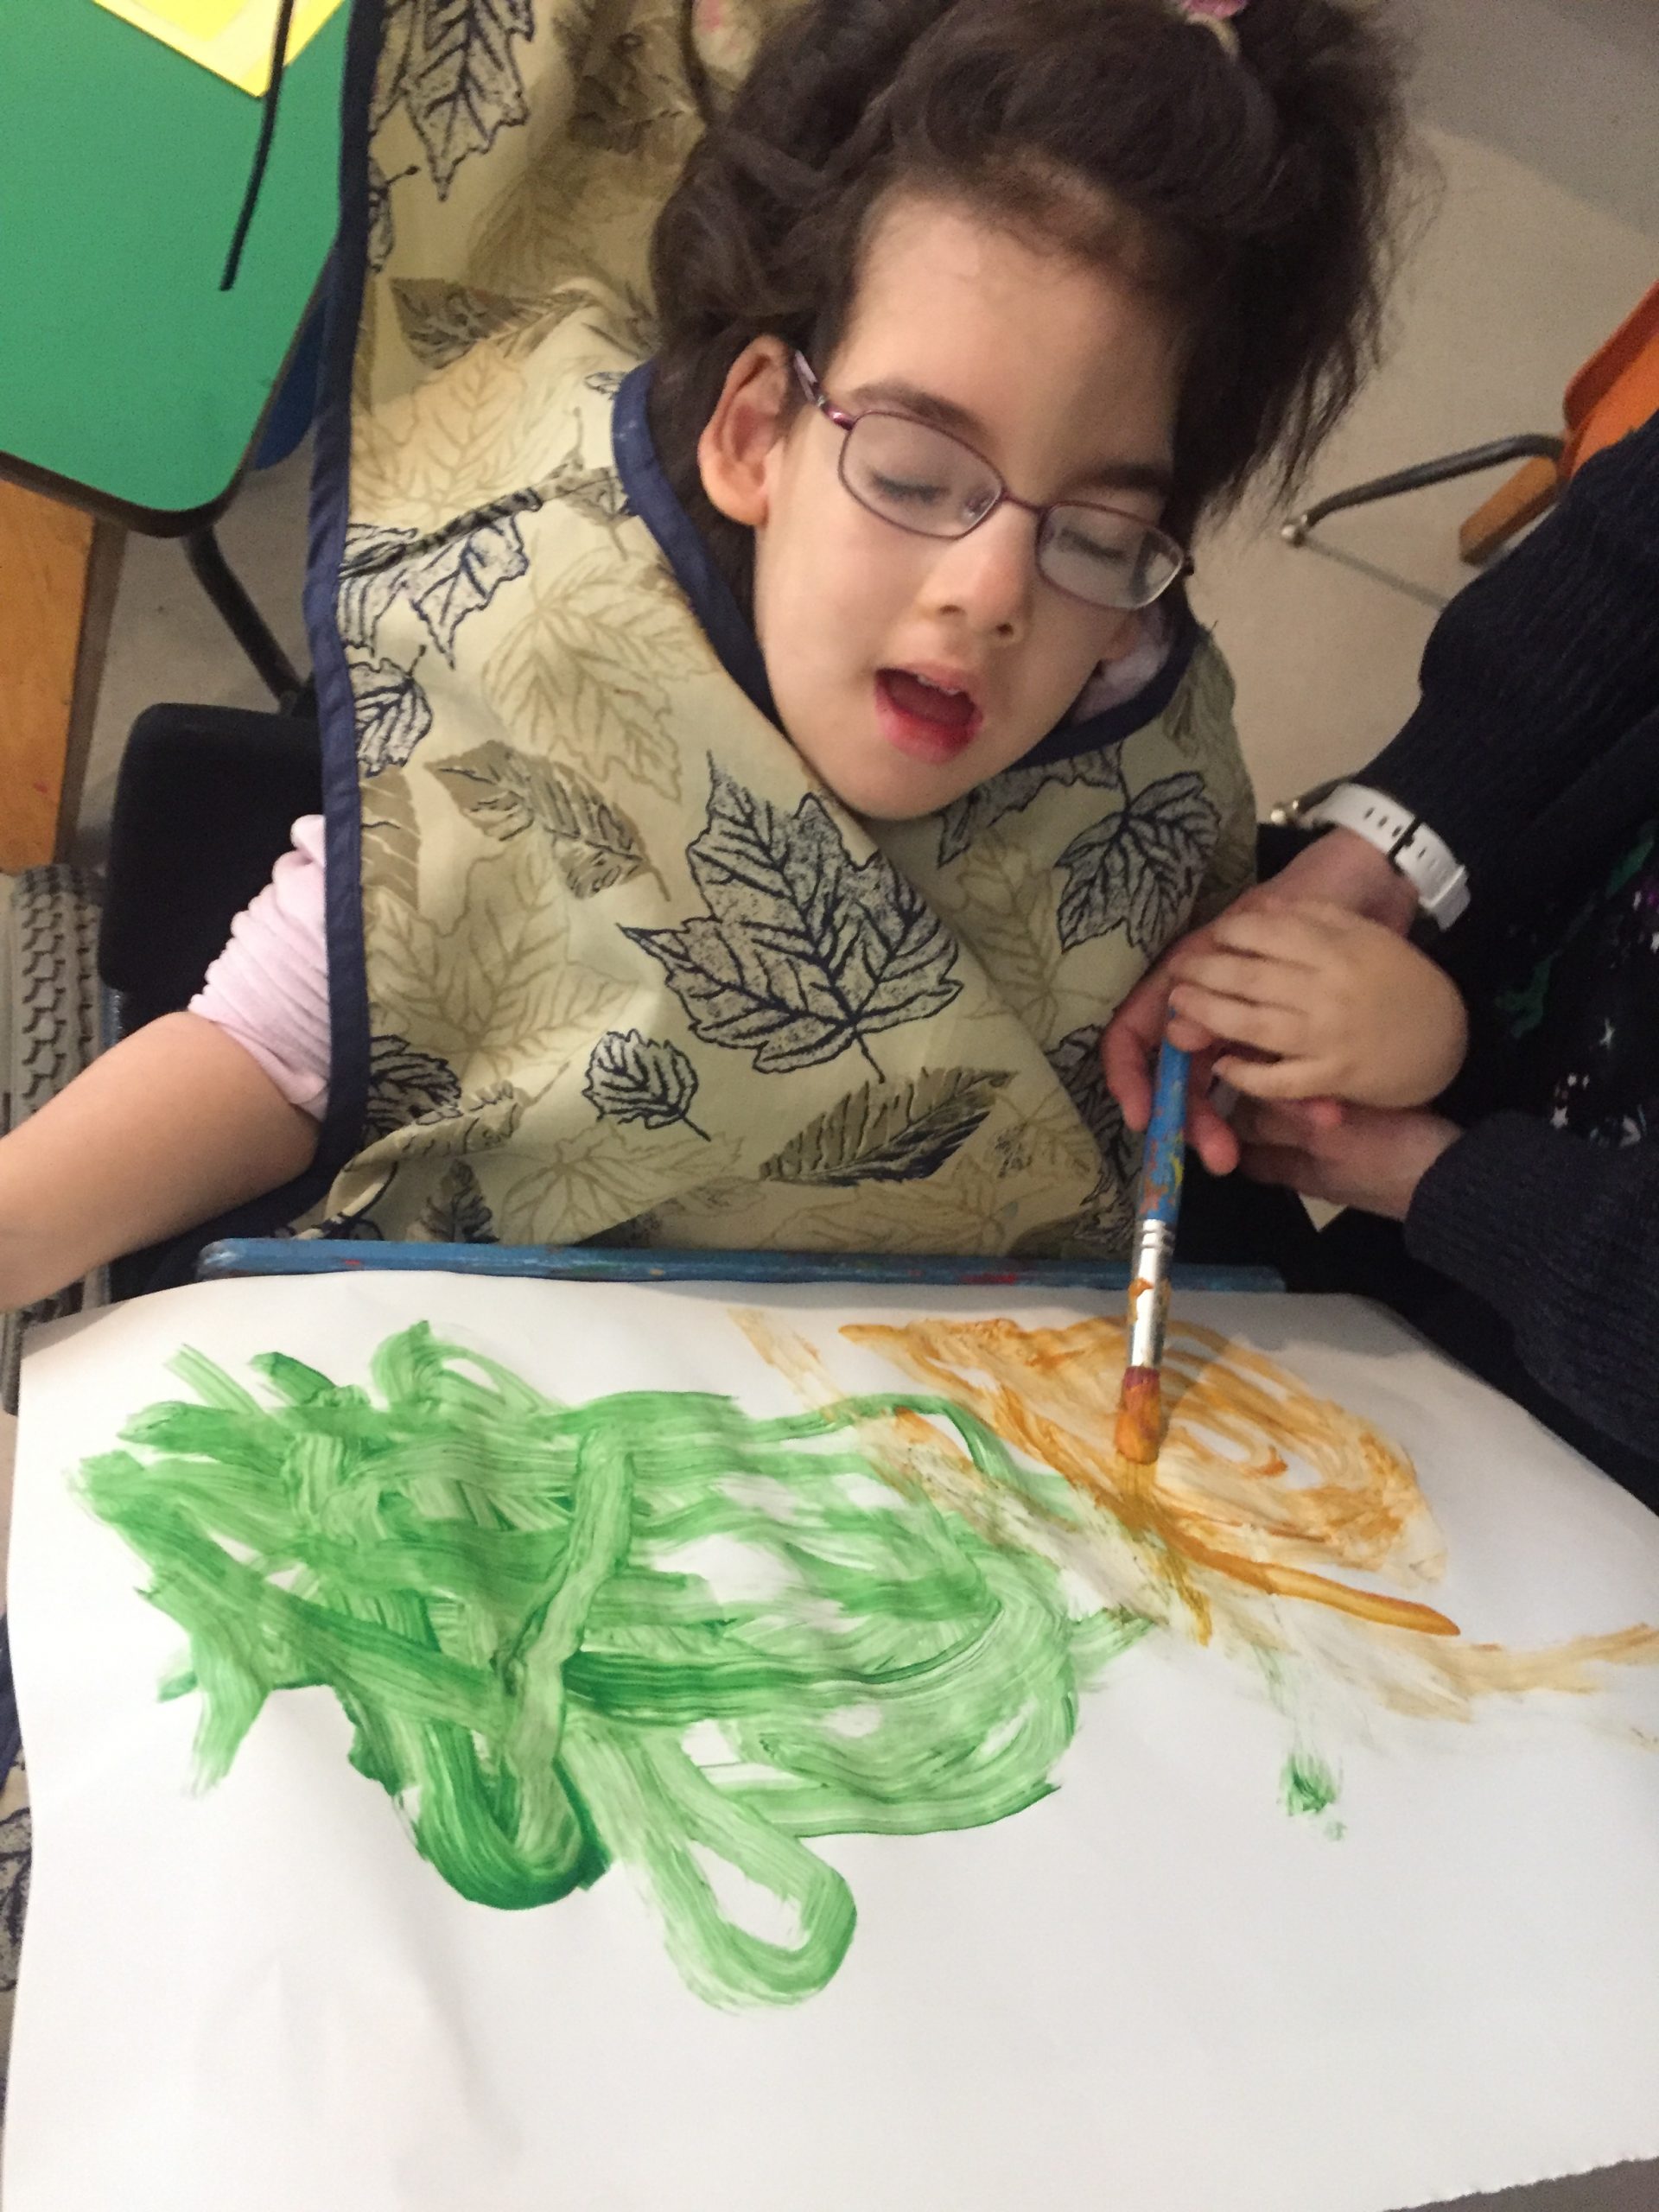 A young girl with dark wavy long hair wearing a bib with sketches of maple leaves on it is painting an orange and green picture. An adult on her left is supporting her left hand as they use hand-under-hand technique to paint with a blue paint brush.